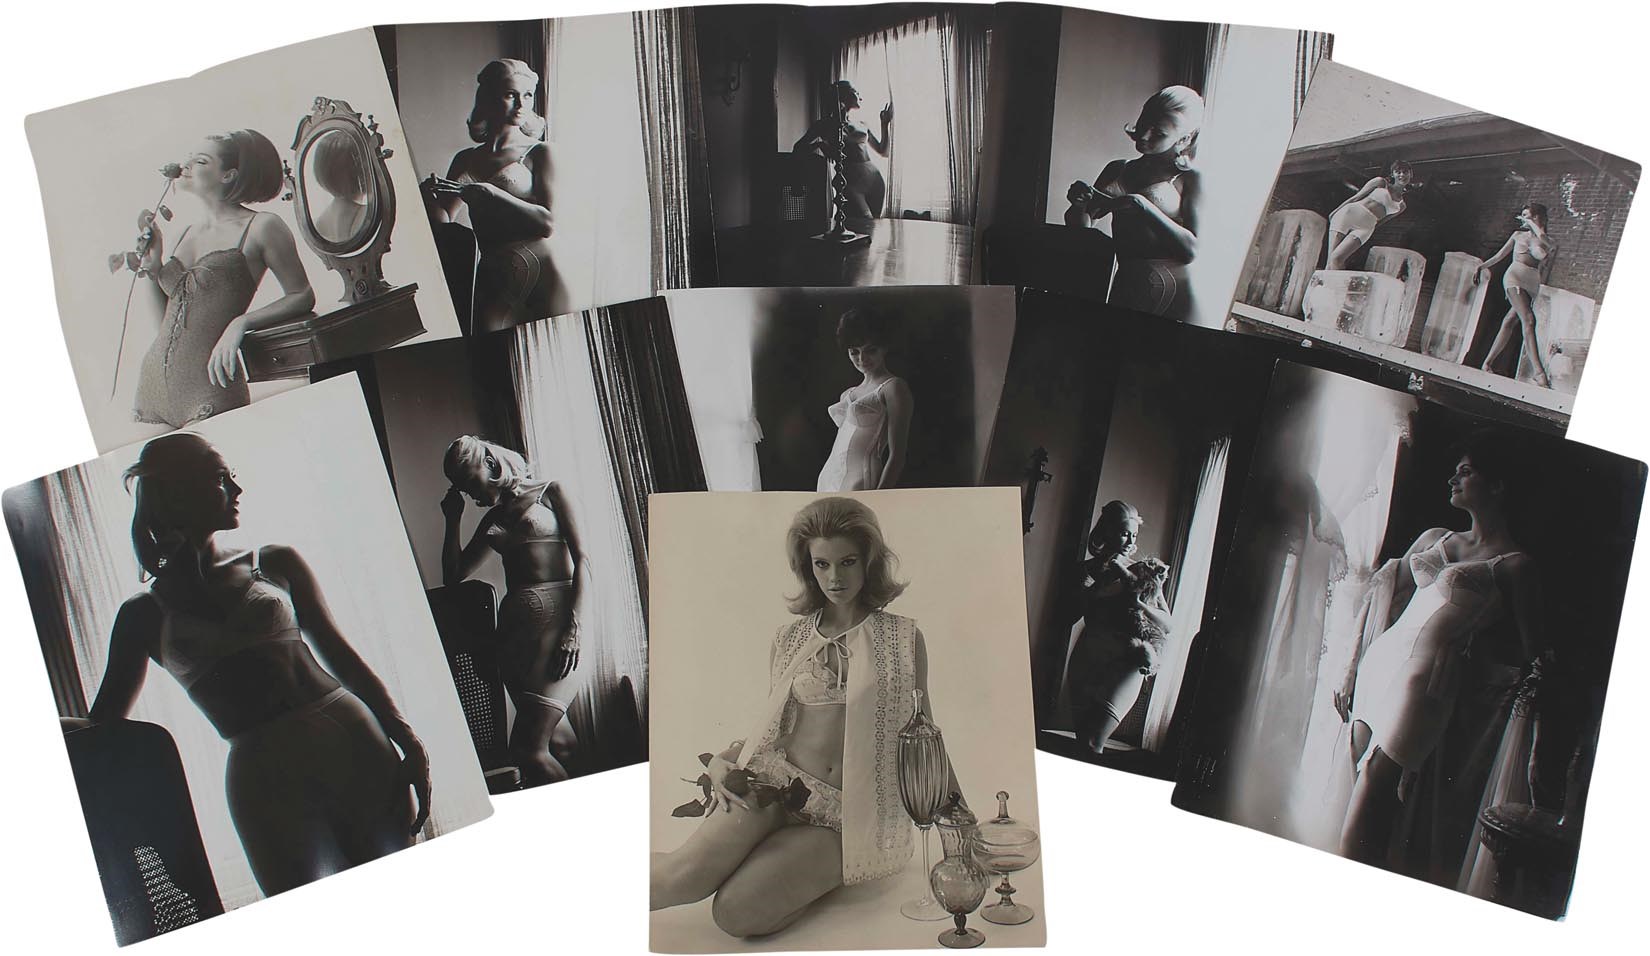 - The Solowinski Archive: Photographs & Fashion from Richard Avedon Associate (10,000+ pieces)